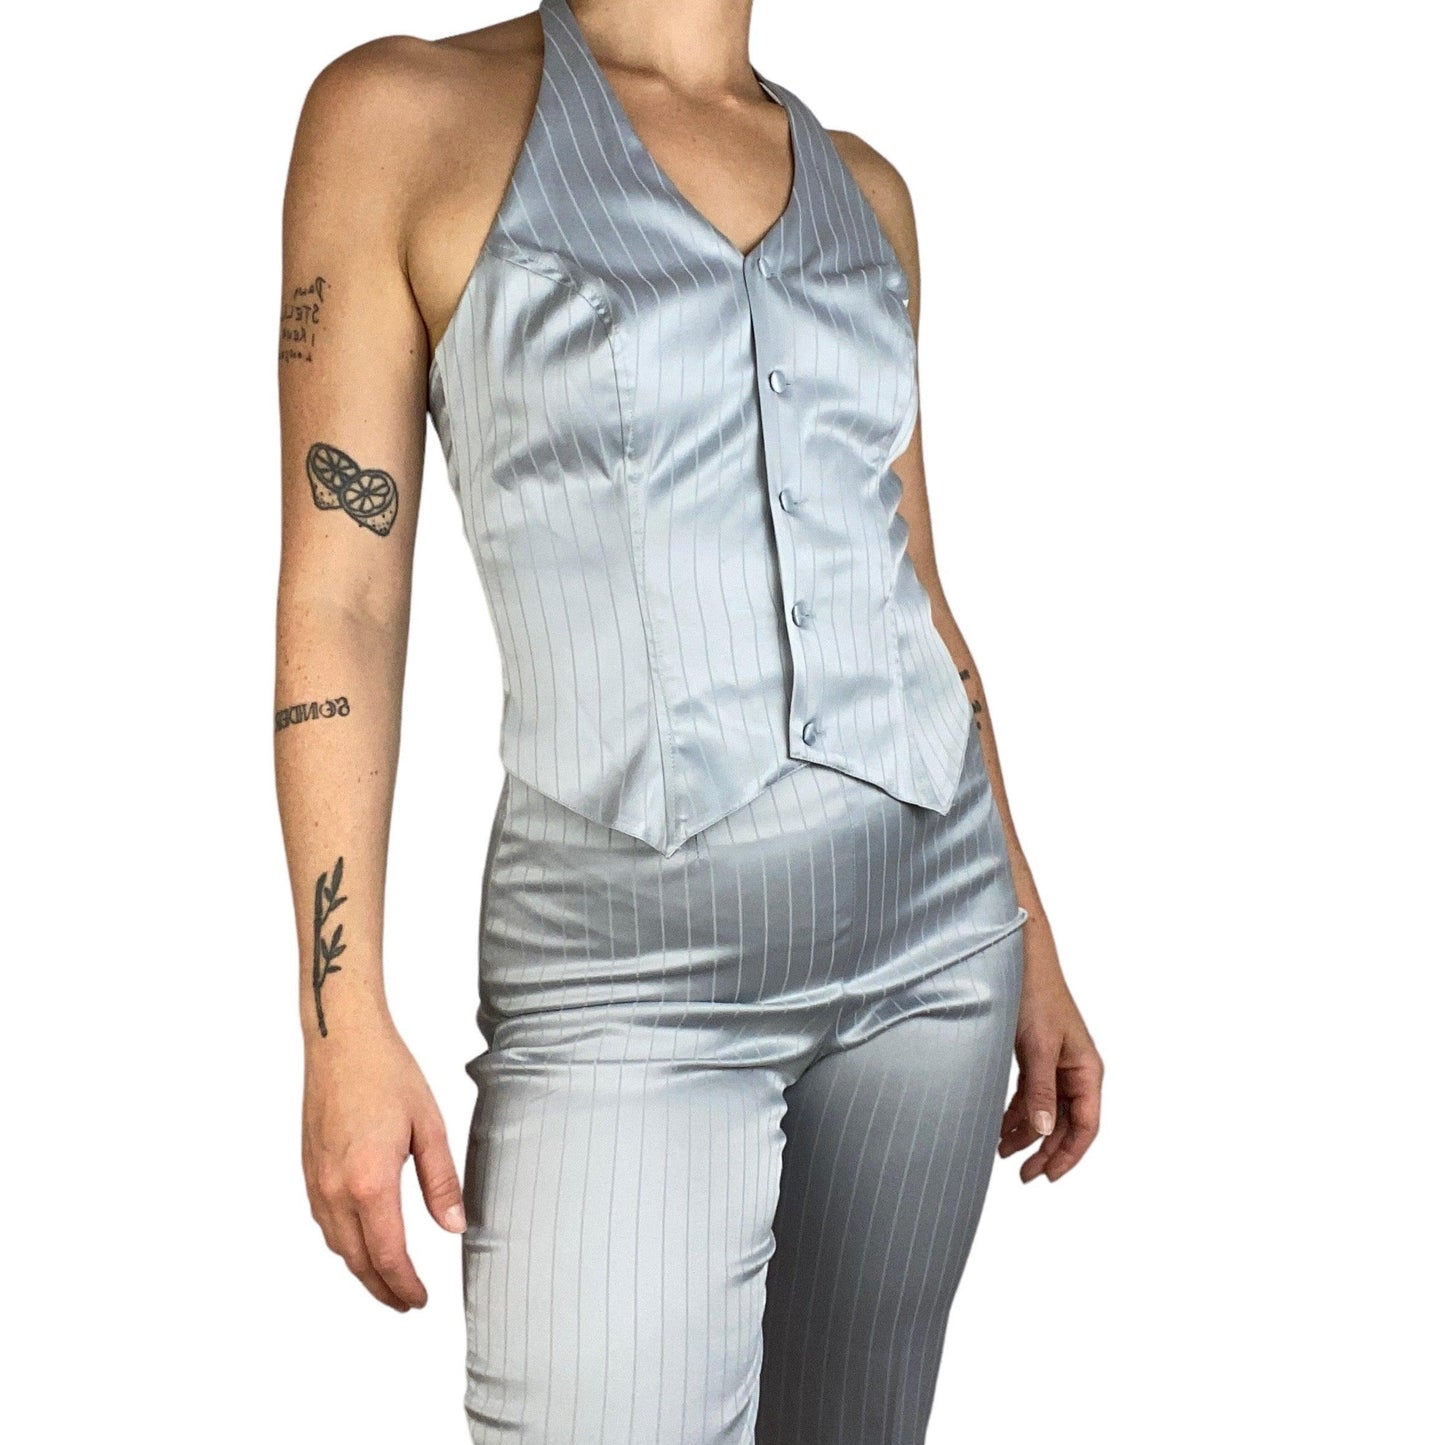 The Slick Silver Waistcoat One - Known Source